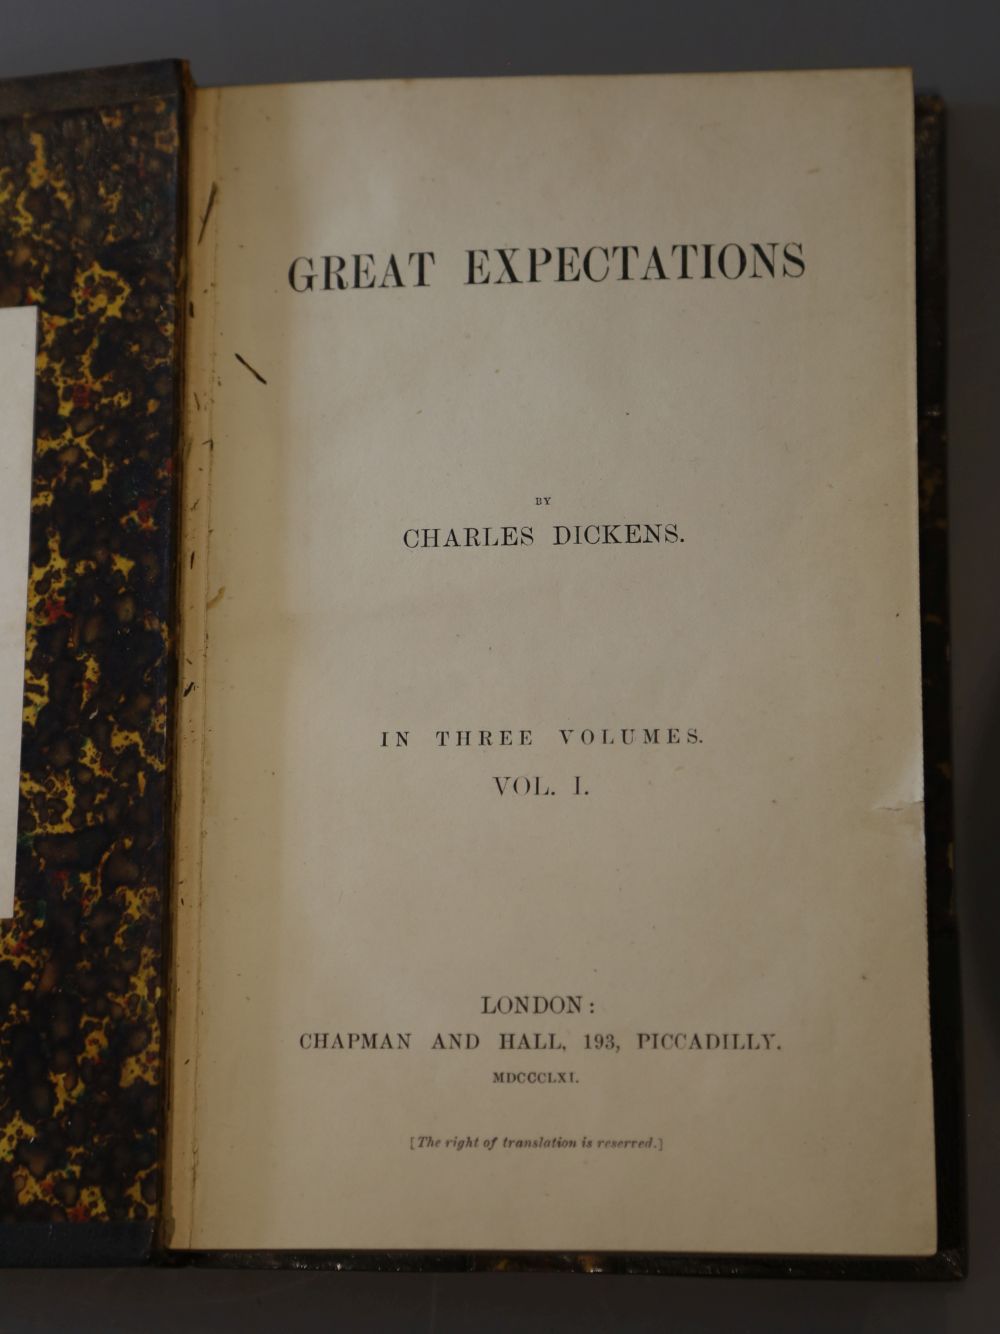 Dickens, Charles - Great Expectations, 1st edition (early issue), 3 vols, with an engraved portrait (not called-for) of the dedicatee (